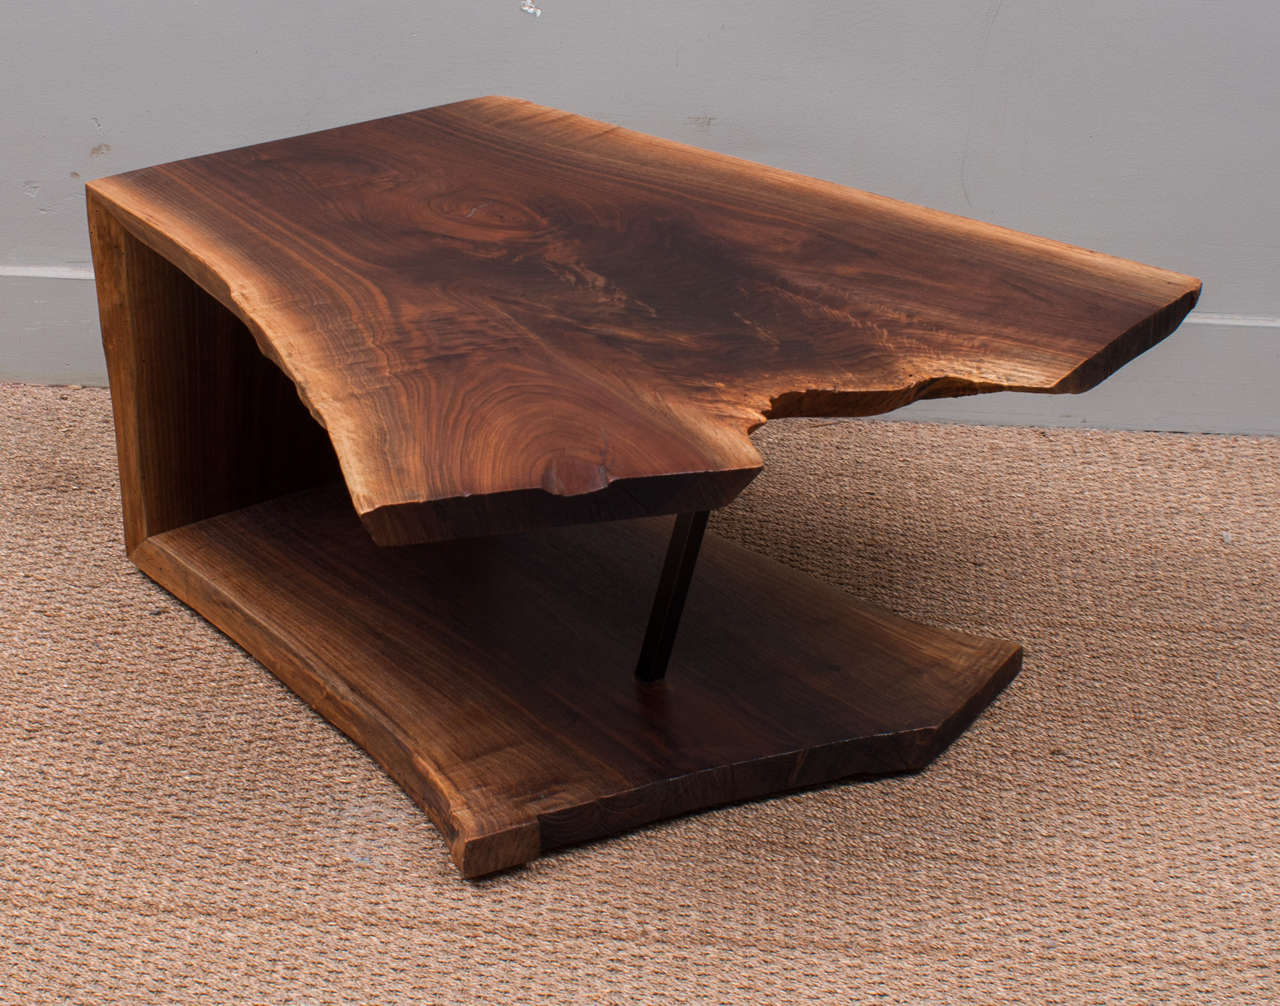 Striking one of a kind cocktail table crafted from one piece of walnut wood in the style of Nakashima.